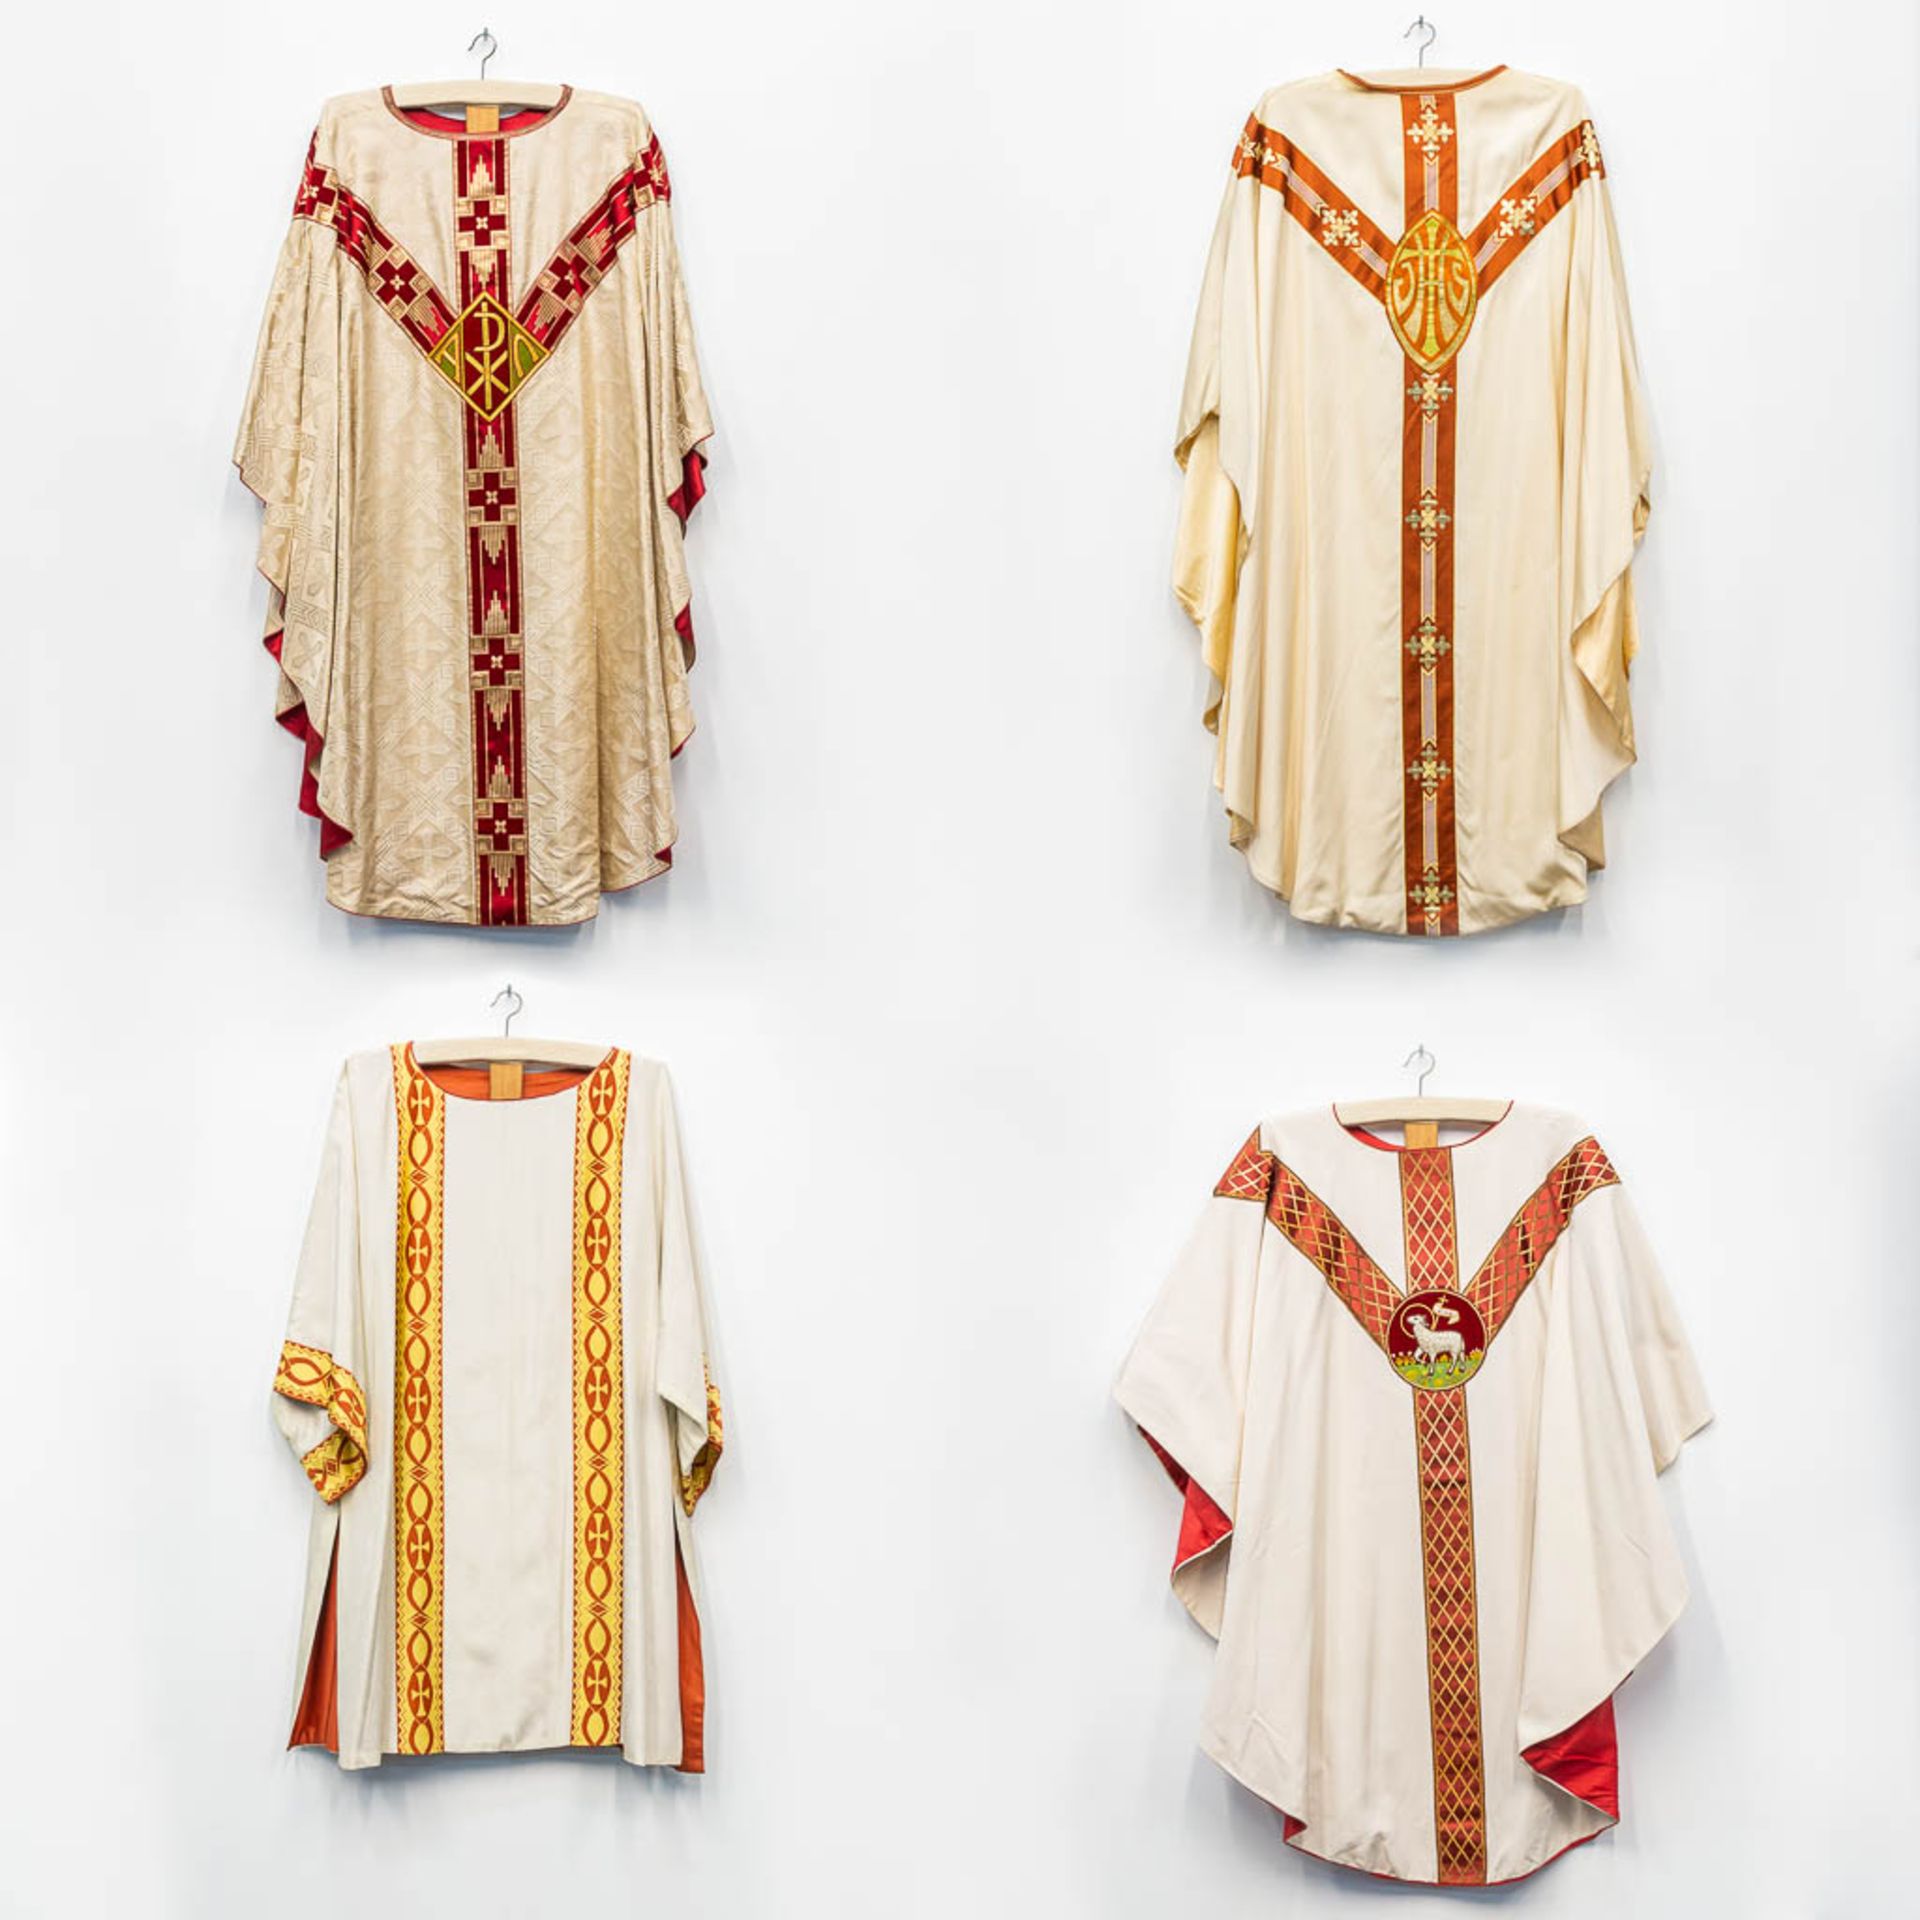 A collection of 4 vintage chasubles, 20th C.